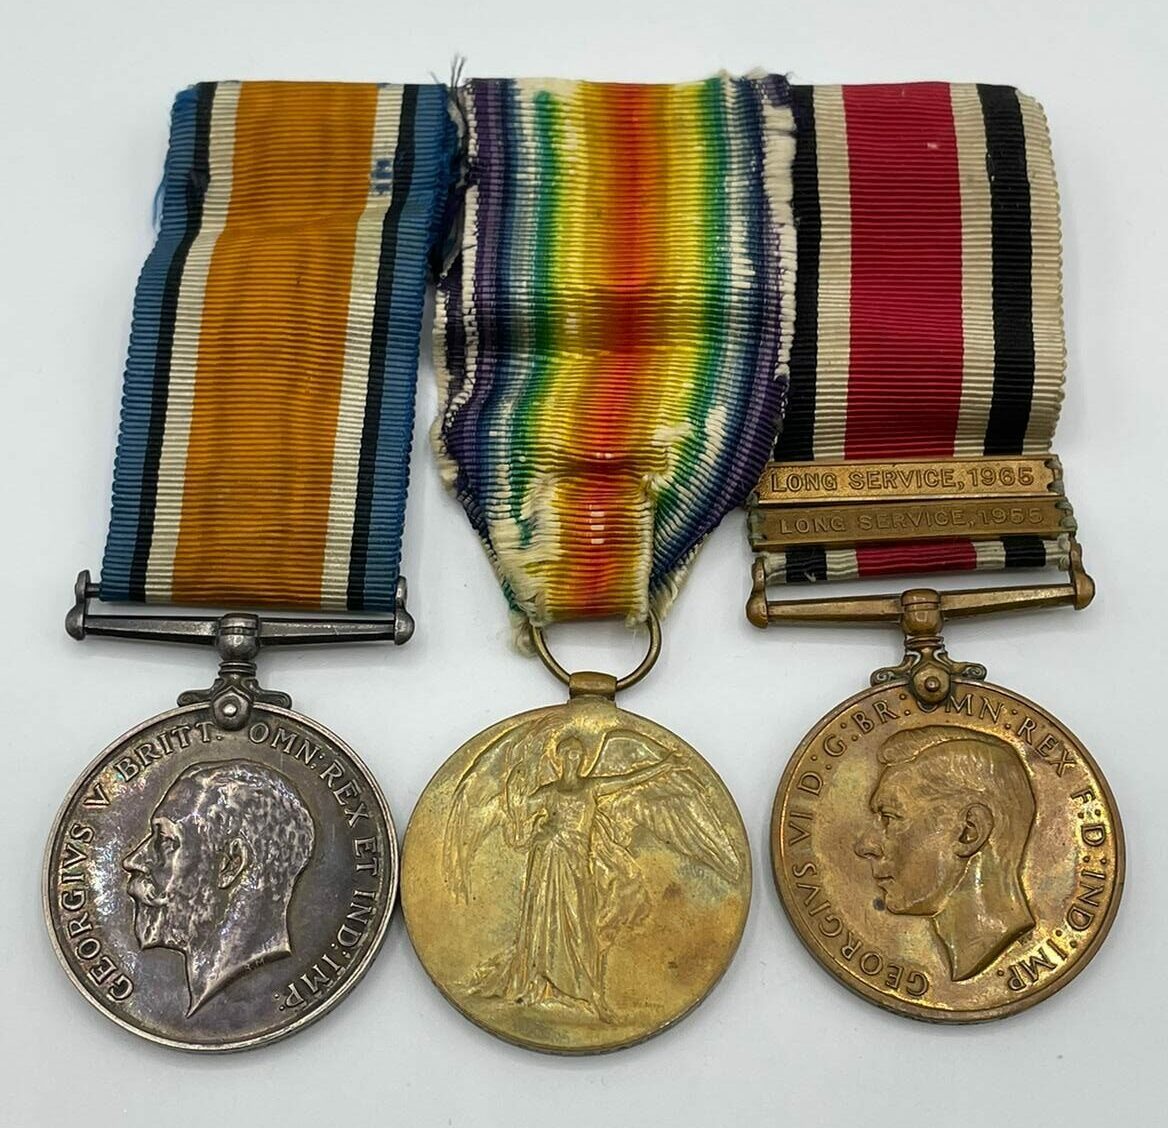 British Red Cross Medals awarded to Miss Molly Jack in 1941 for First Aid, Home Nursing and three years service.